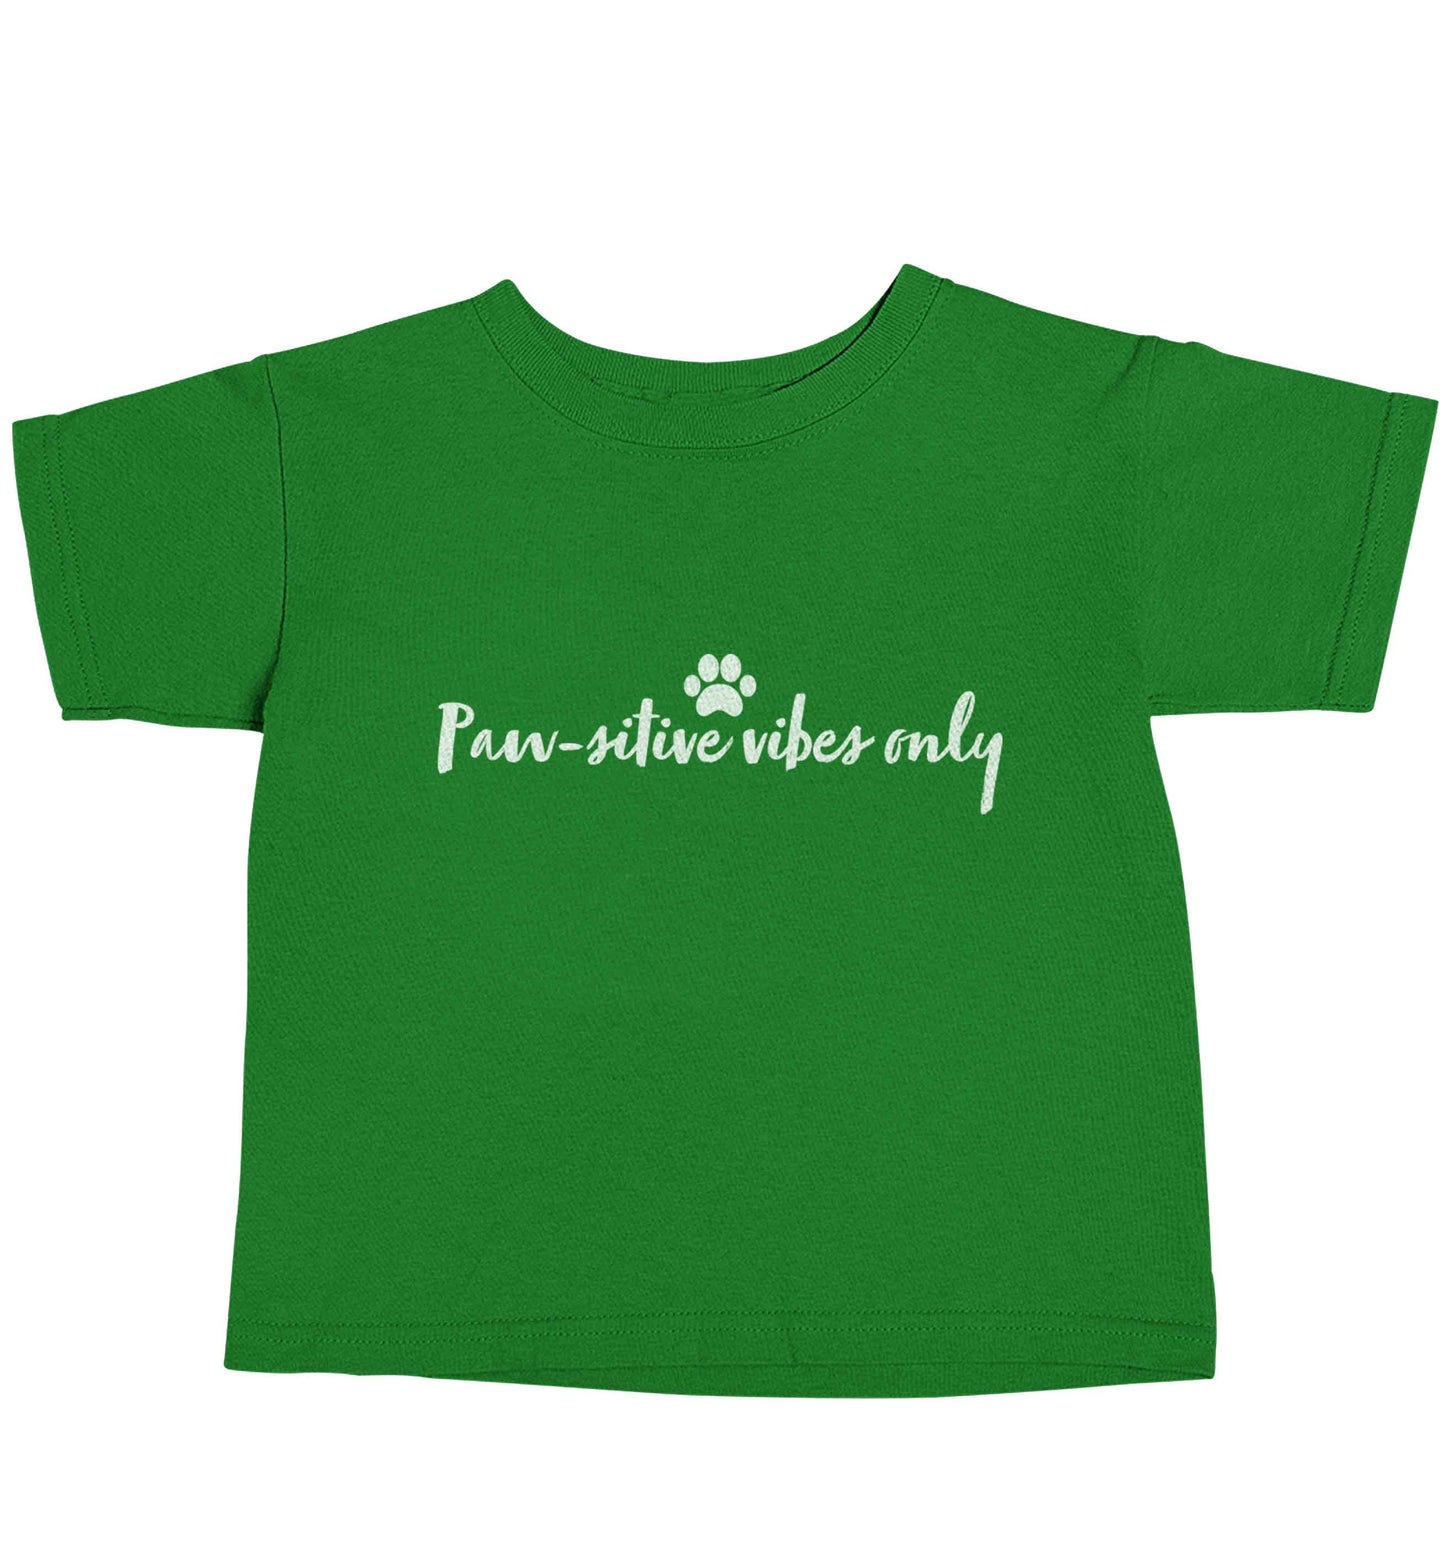 Pawsitive vibes only Kit green baby toddler Tshirt 2 Years